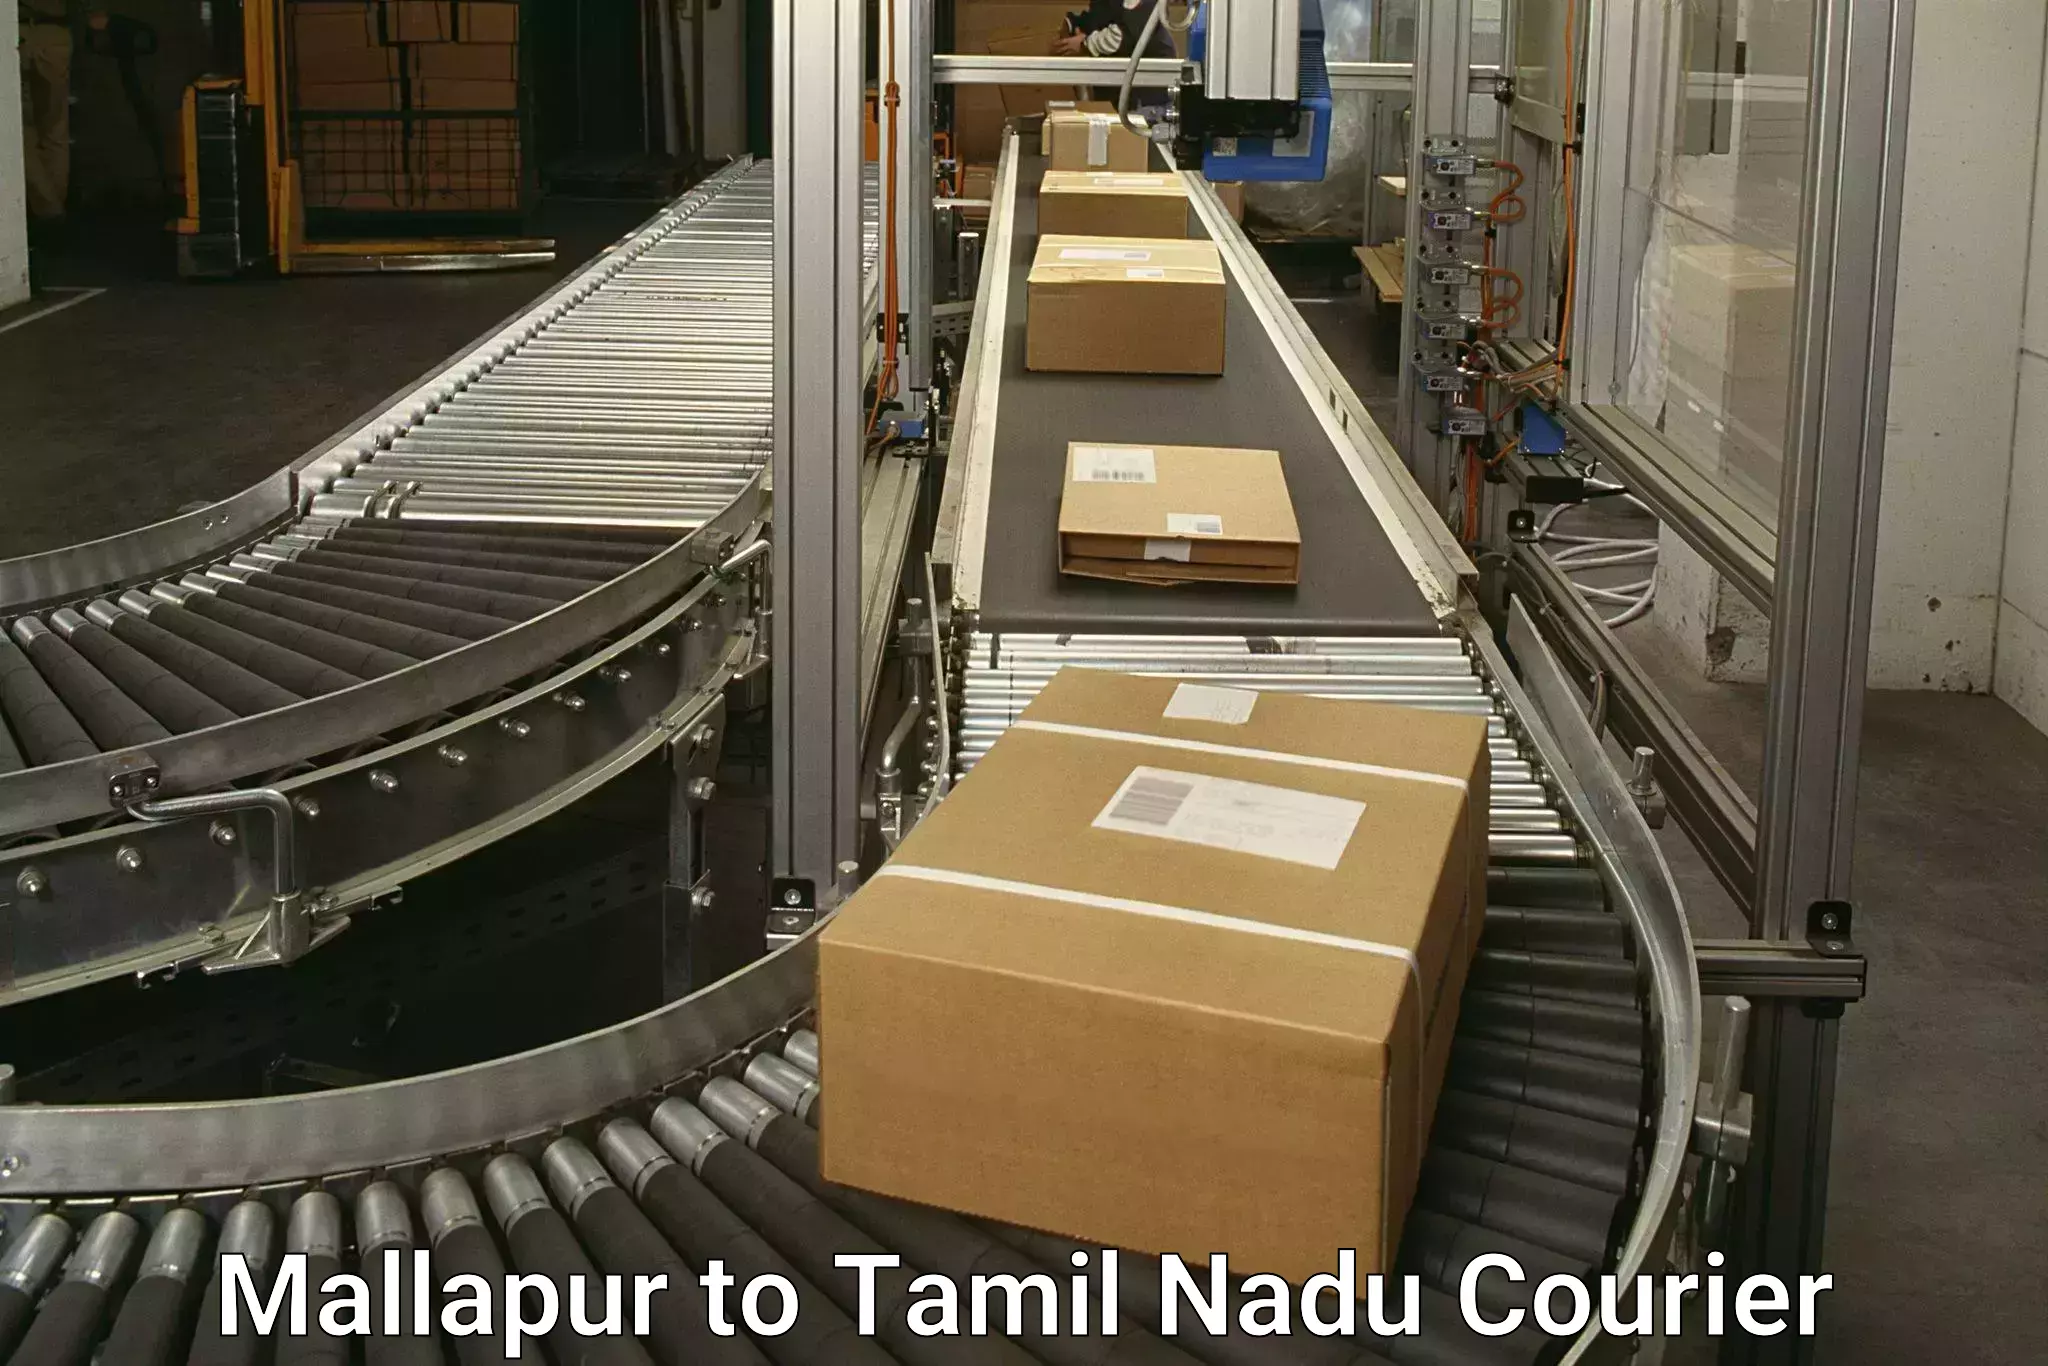 Advanced delivery network Mallapur to Ennore Port Chennai